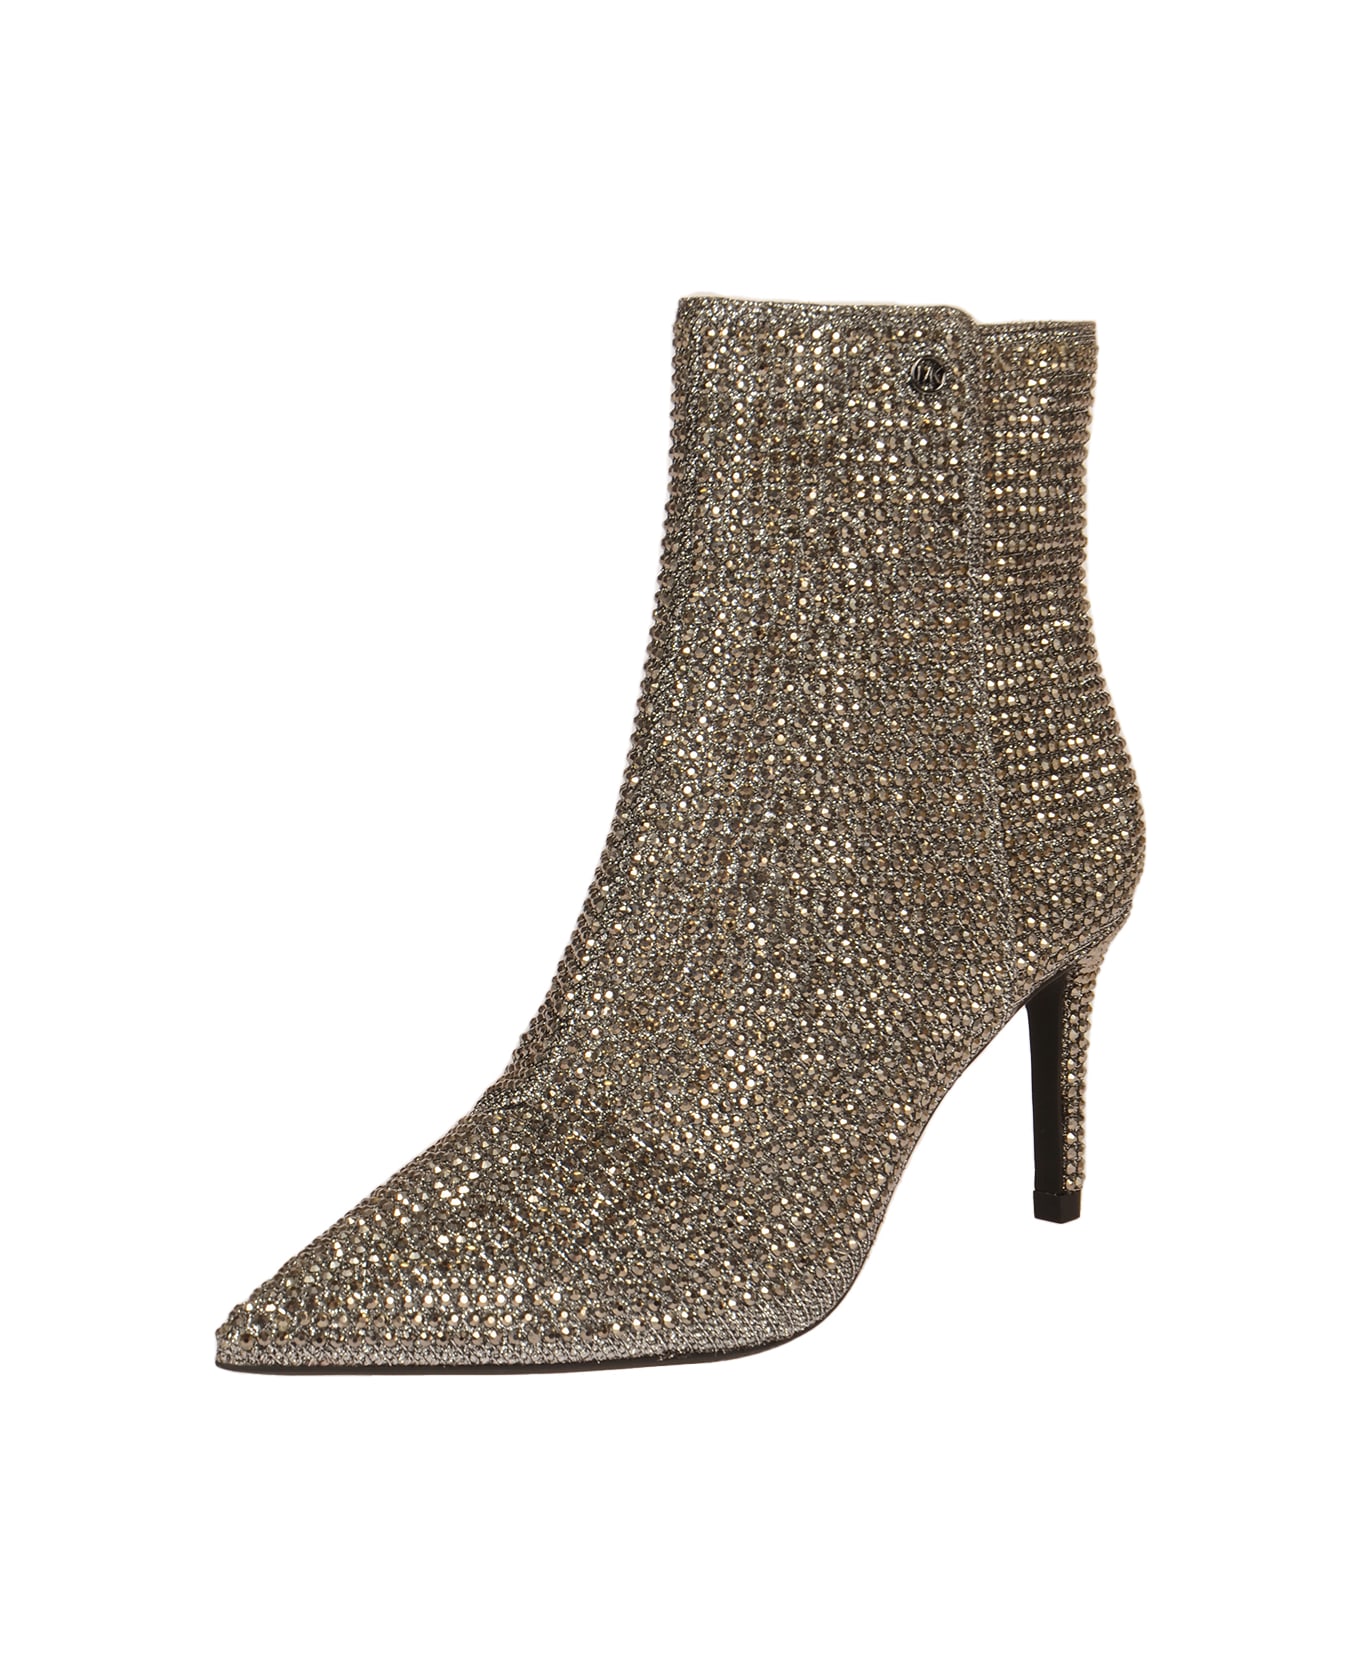 MICHAEL Michael Kors Aline Embellished Heeled Ankle Boots - Anthracite ブーツ